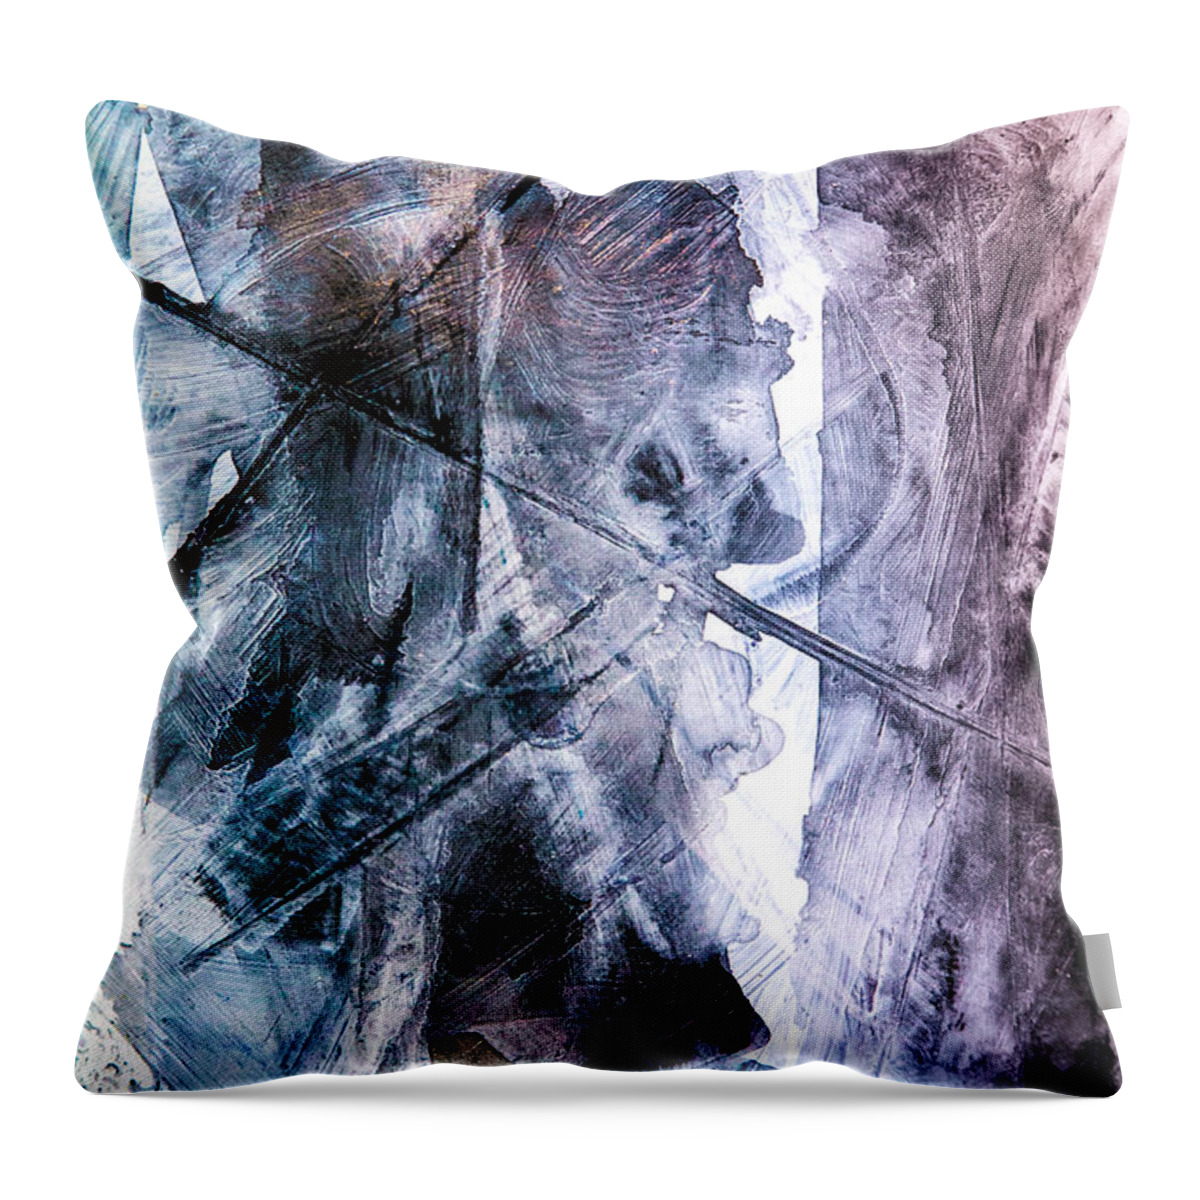  Abstract Throw Pillow featuring the painting Ice Textures by Dan Sisken